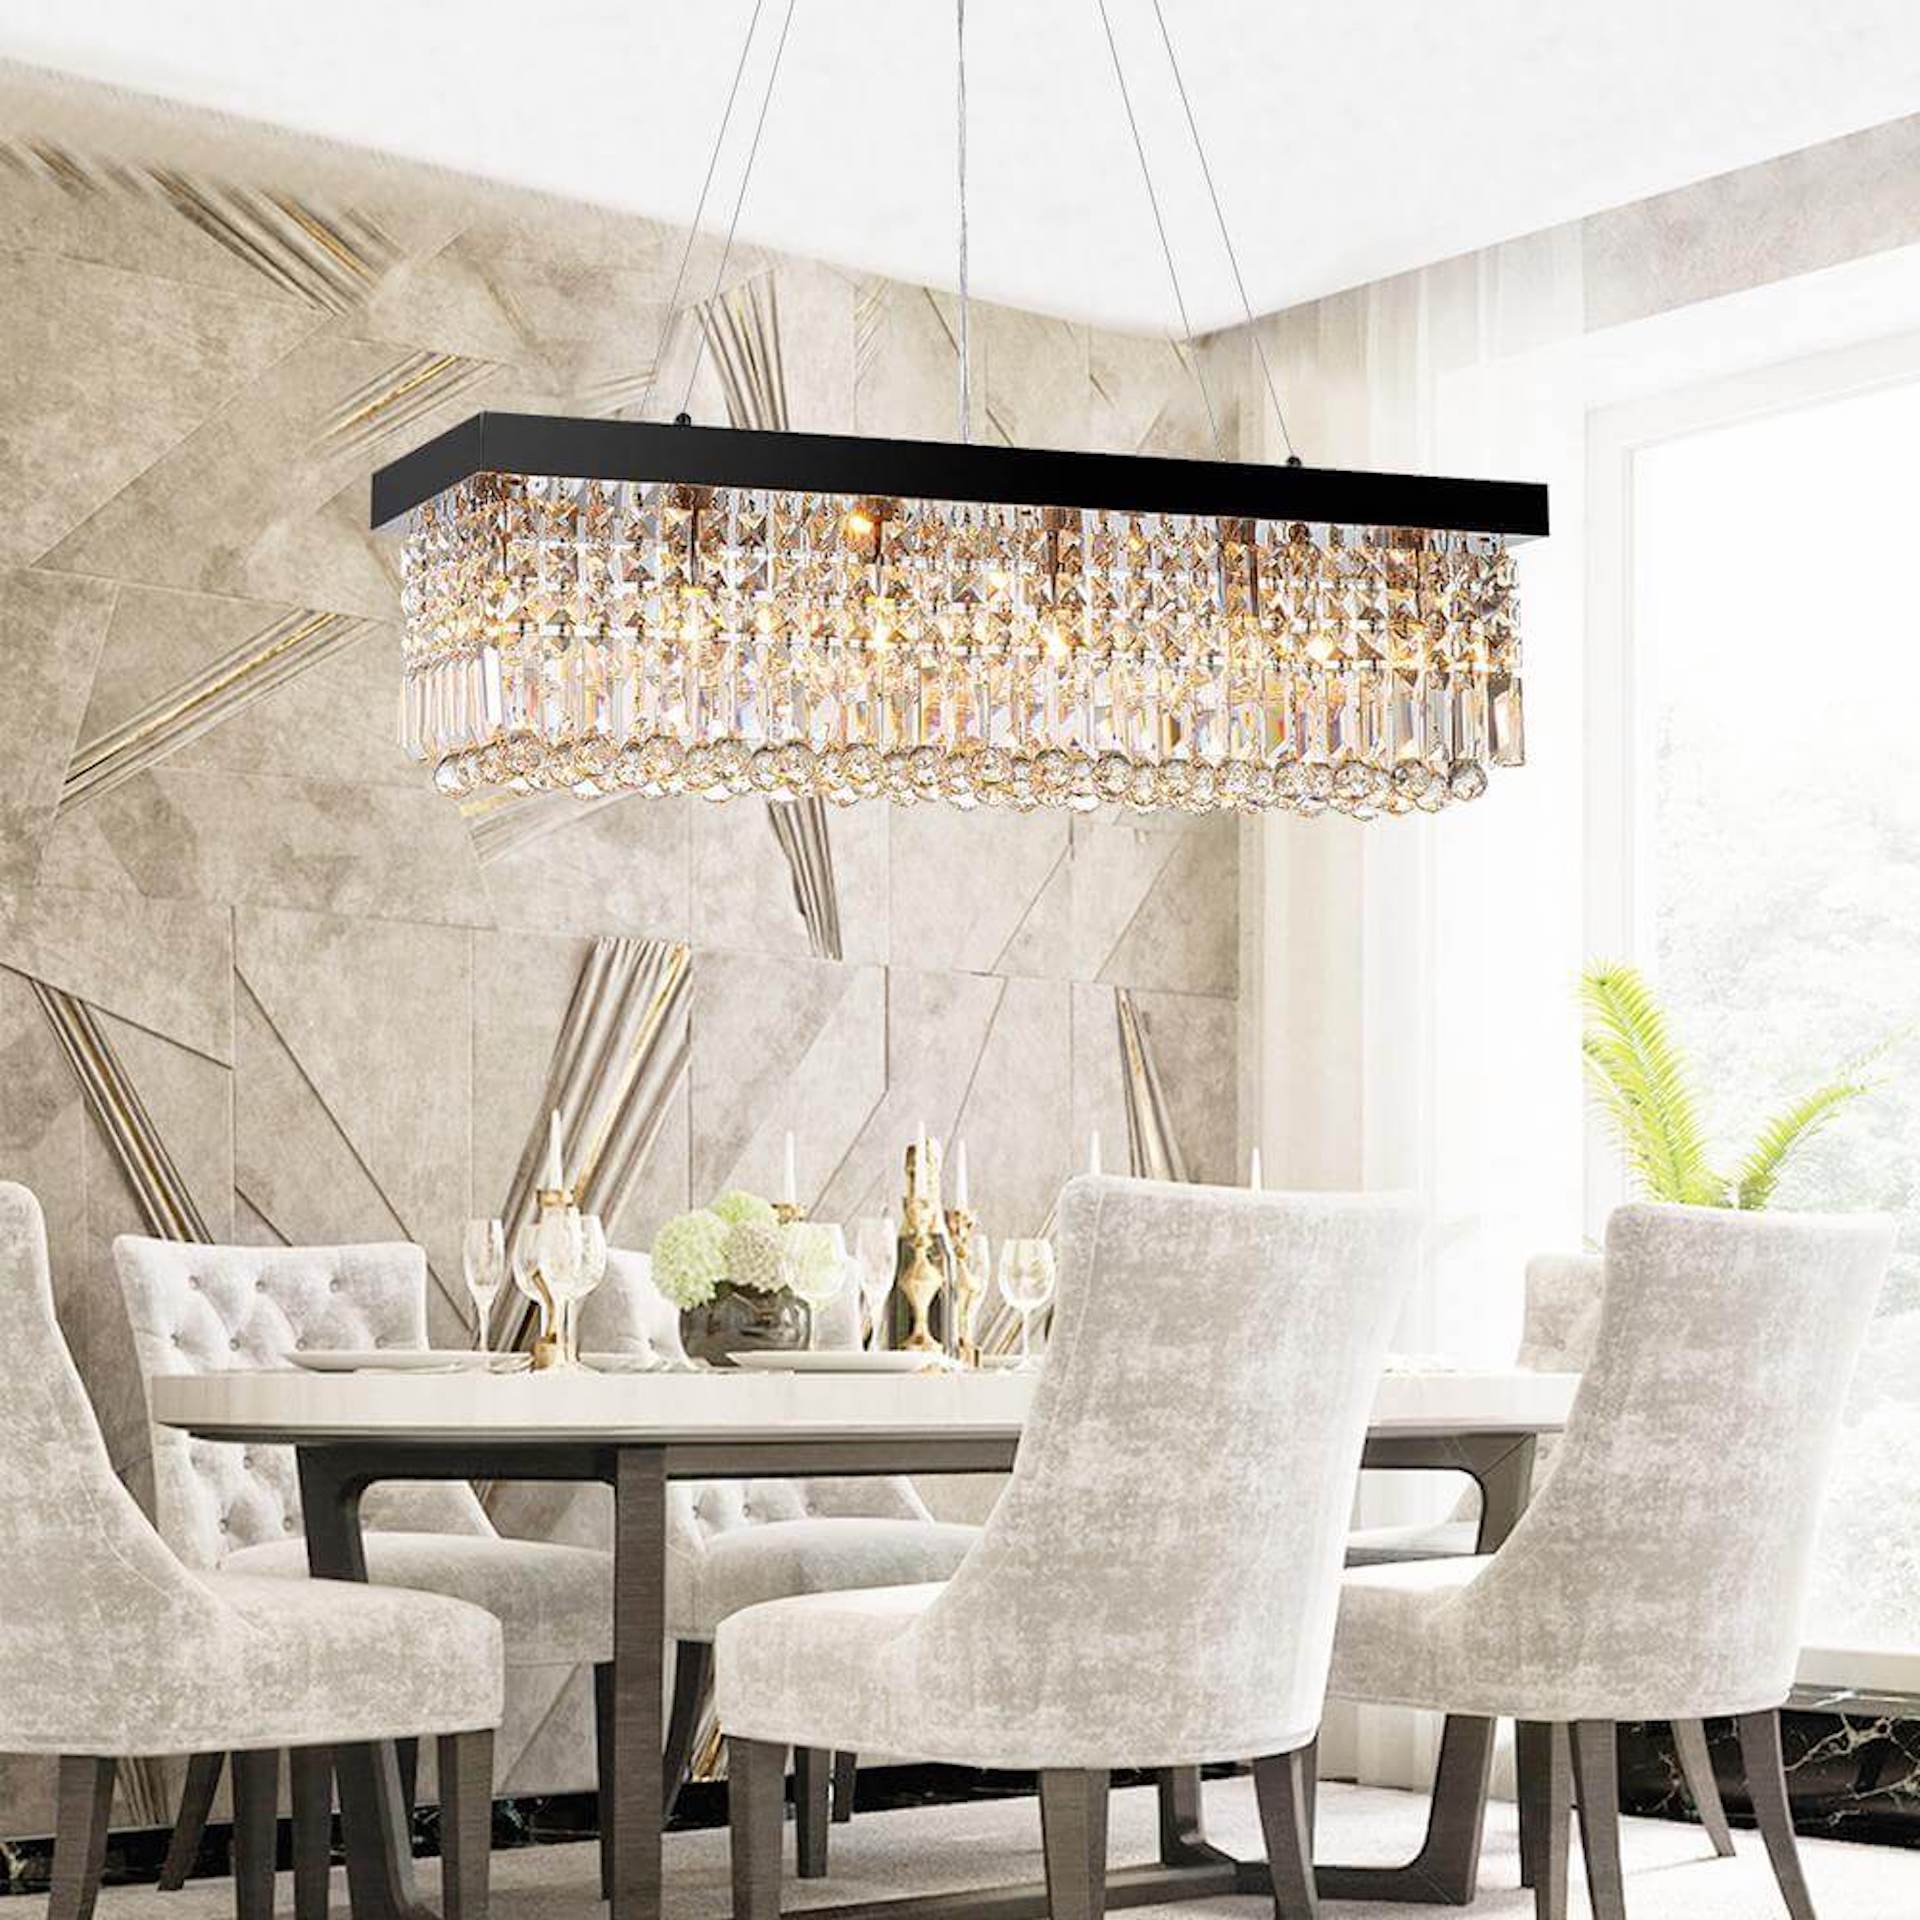 26 Affordable Chandeliers Under $200 That Look Like a Million Bucks